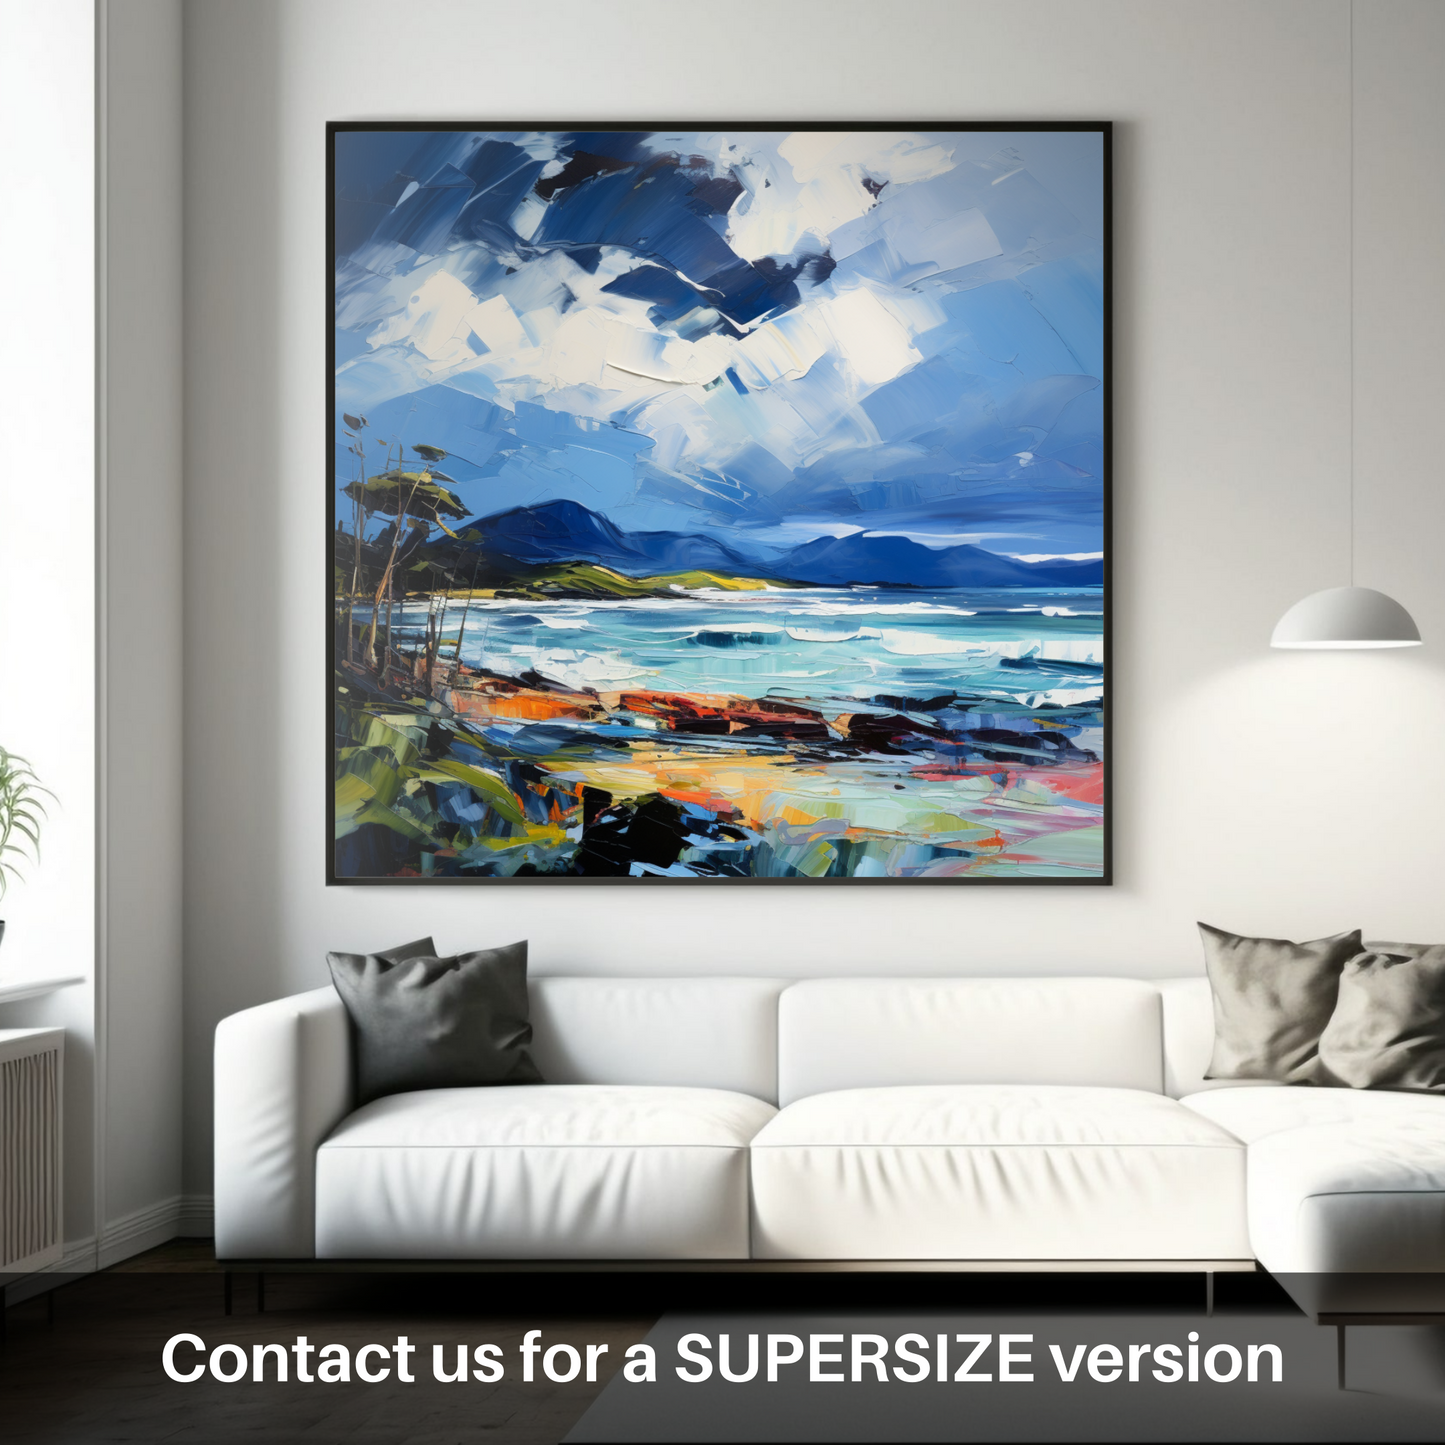 Huge supersize print of Ardalanish Bay with a stormy sky